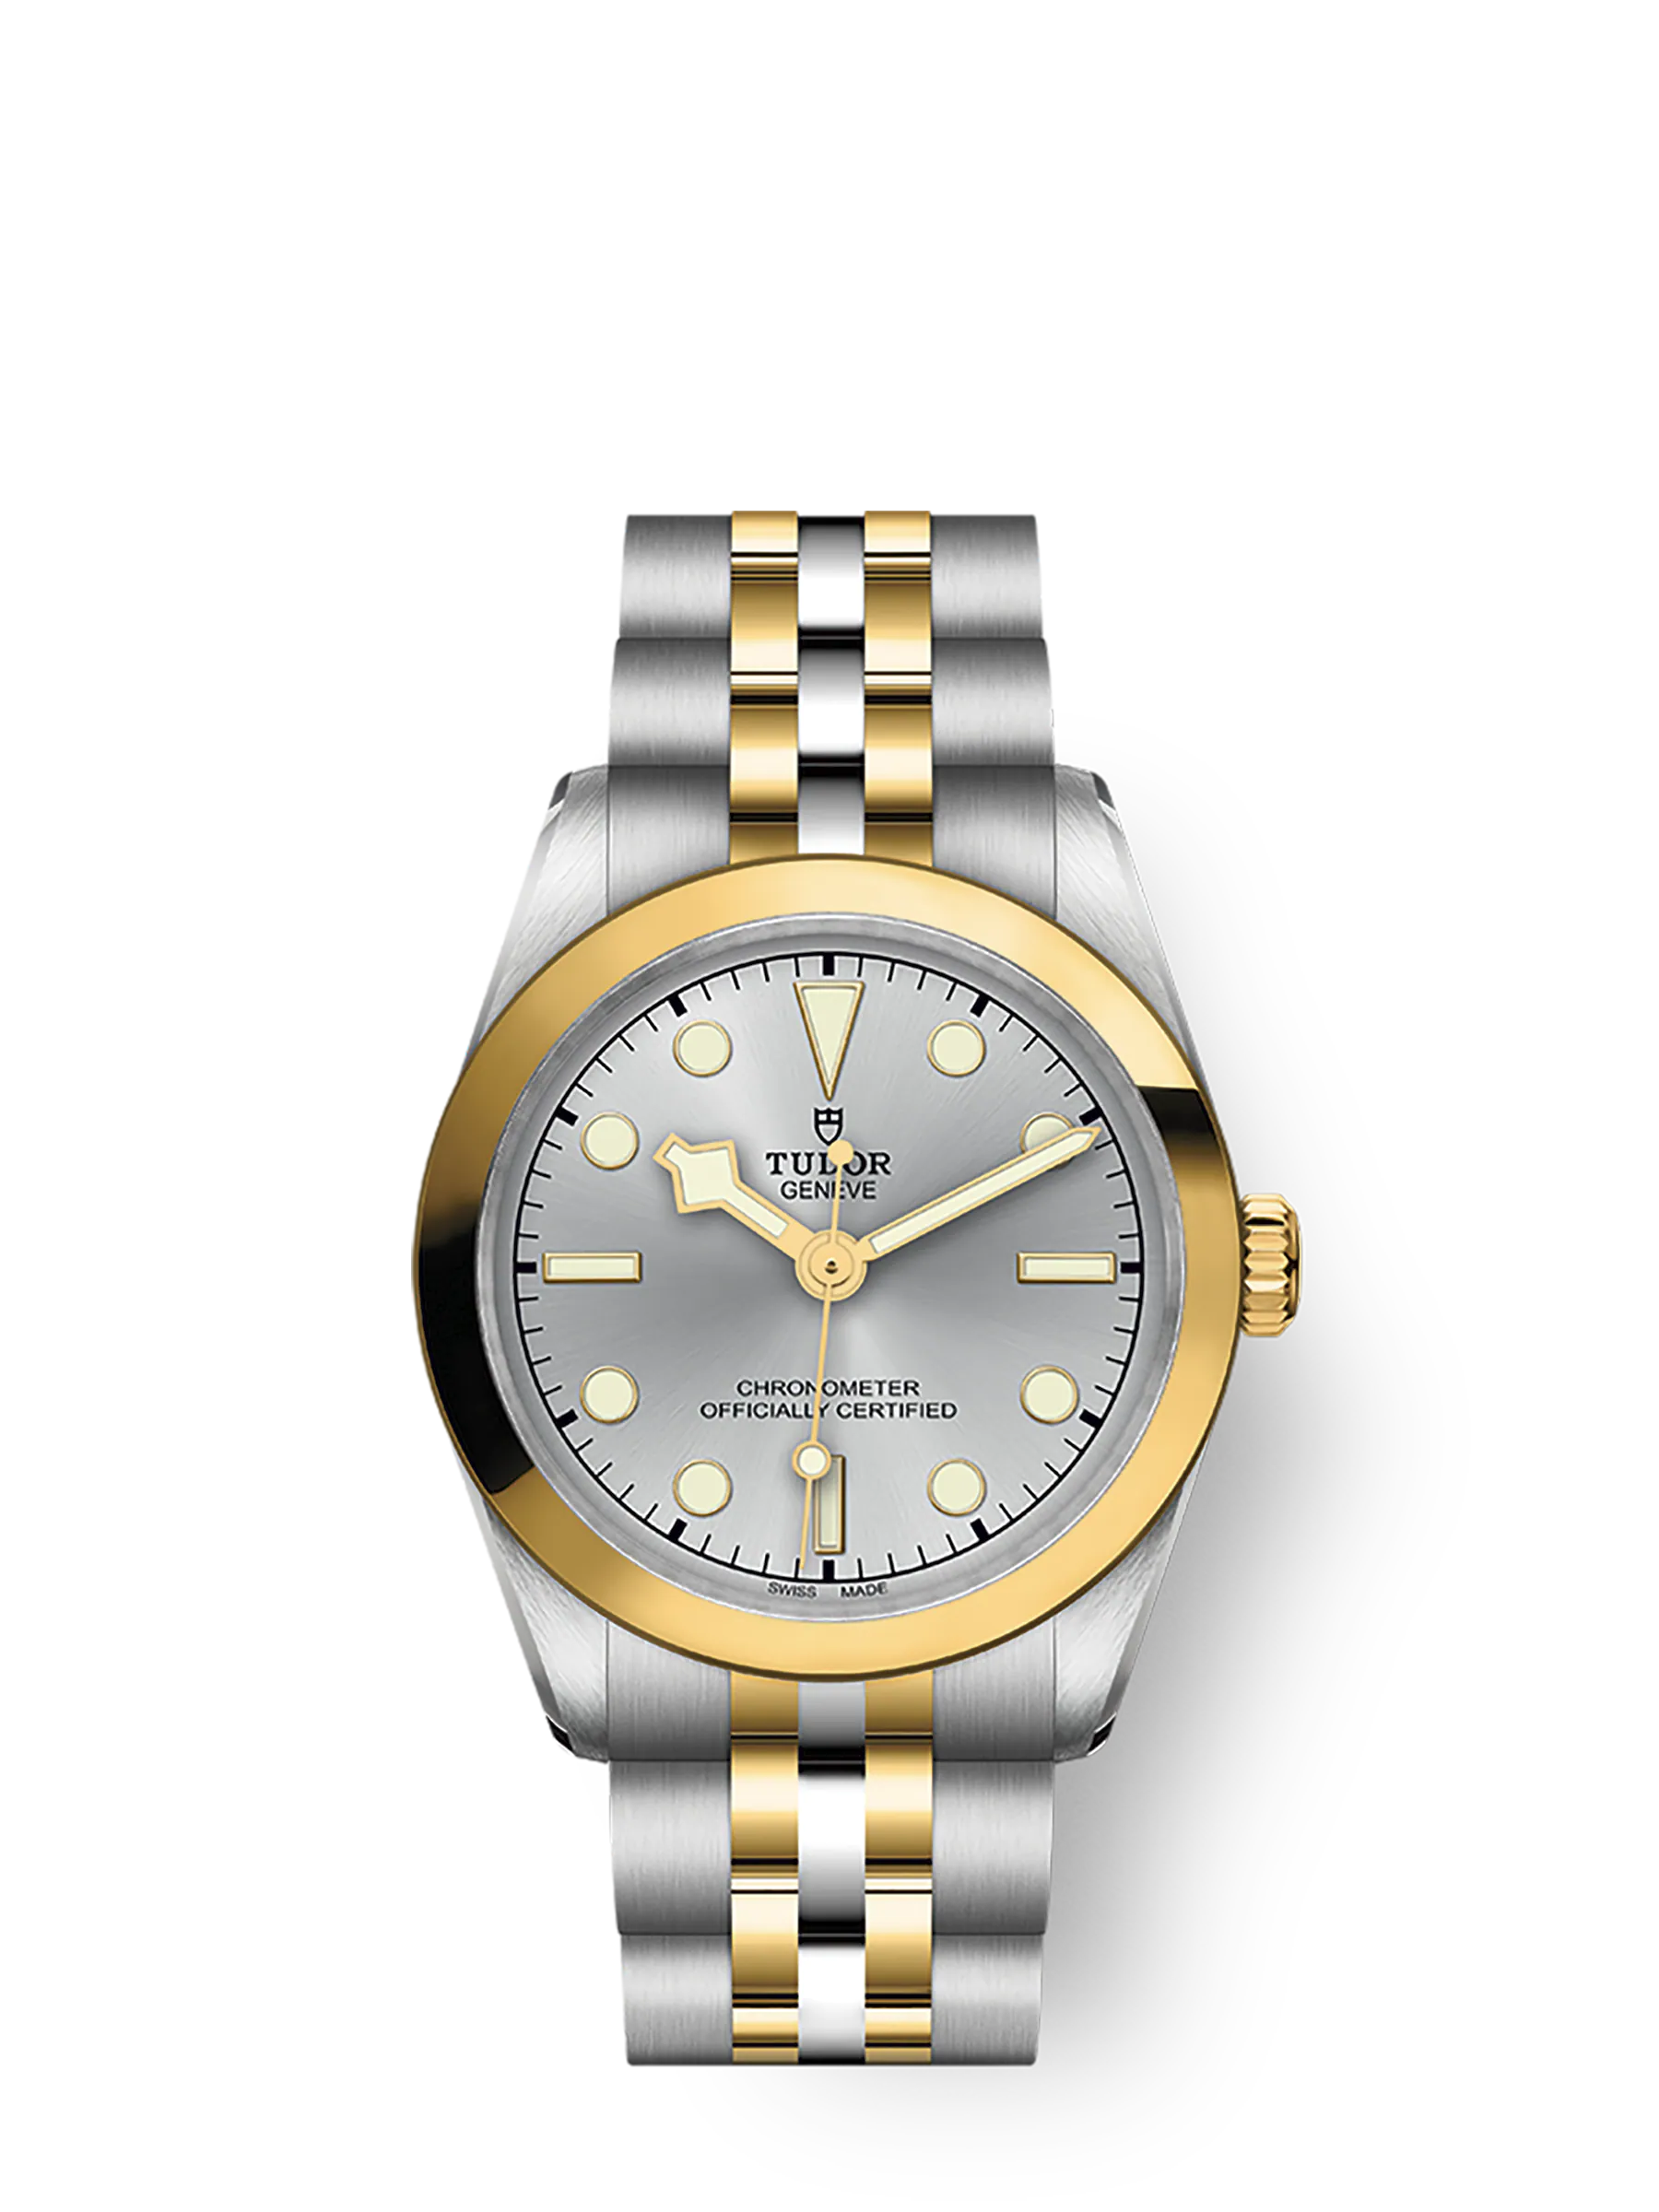 Tudor Black Bay 36 S&G, Stainless Steel and 18k Yellow Gold, Ref# M79643-0002